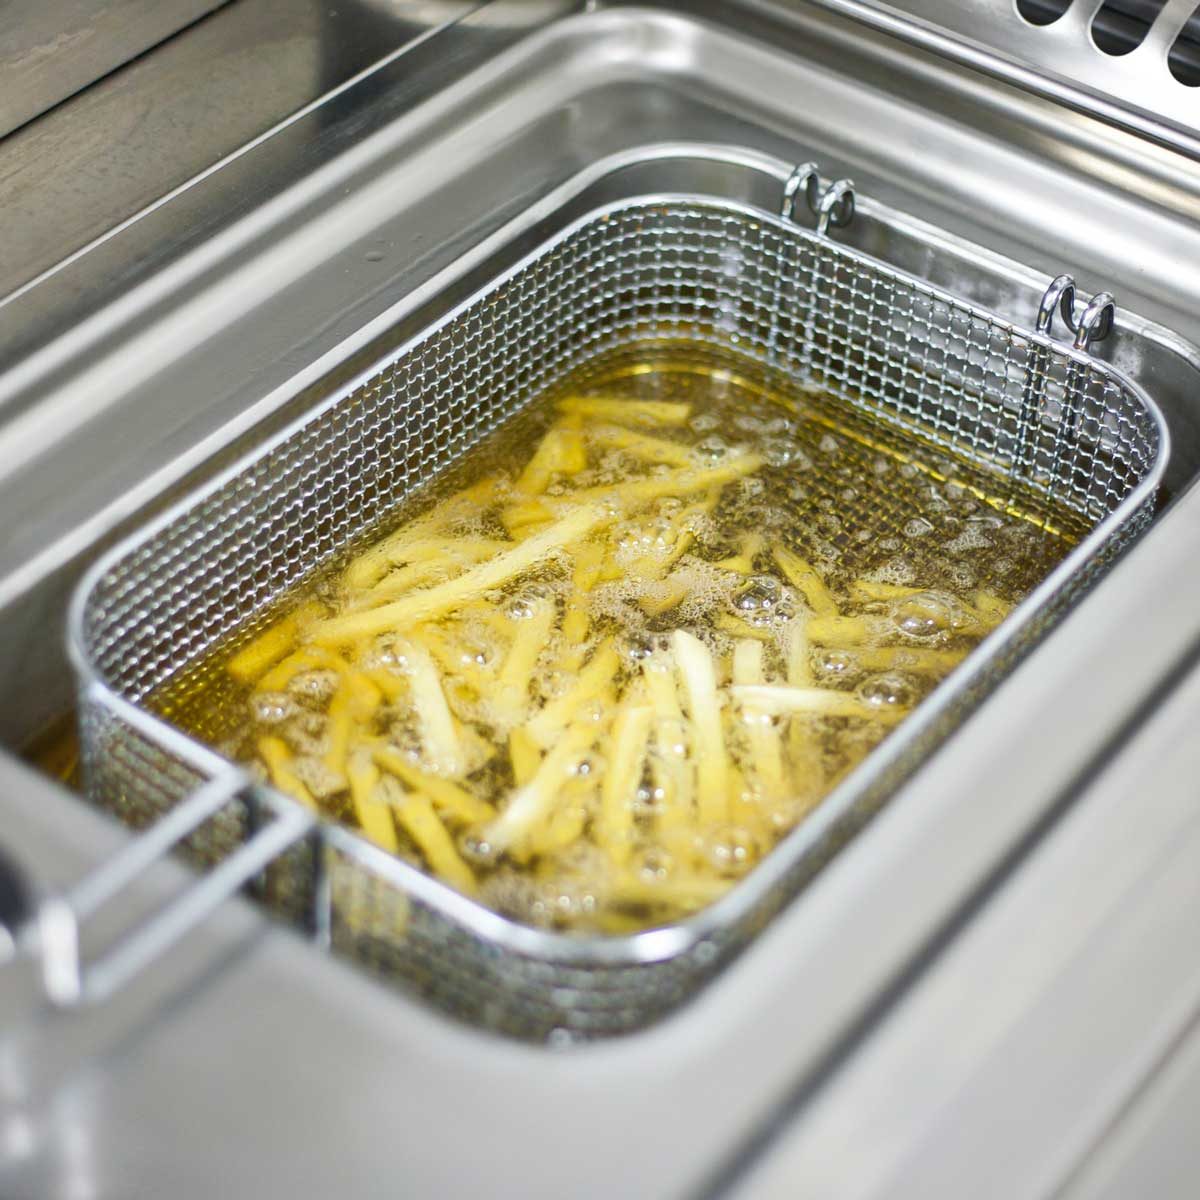 https://www.familyhandyman.com/wp-content/uploads/2020/06/frying-french-fries-GettyImages-149419715.jpg?fit=696%2C696